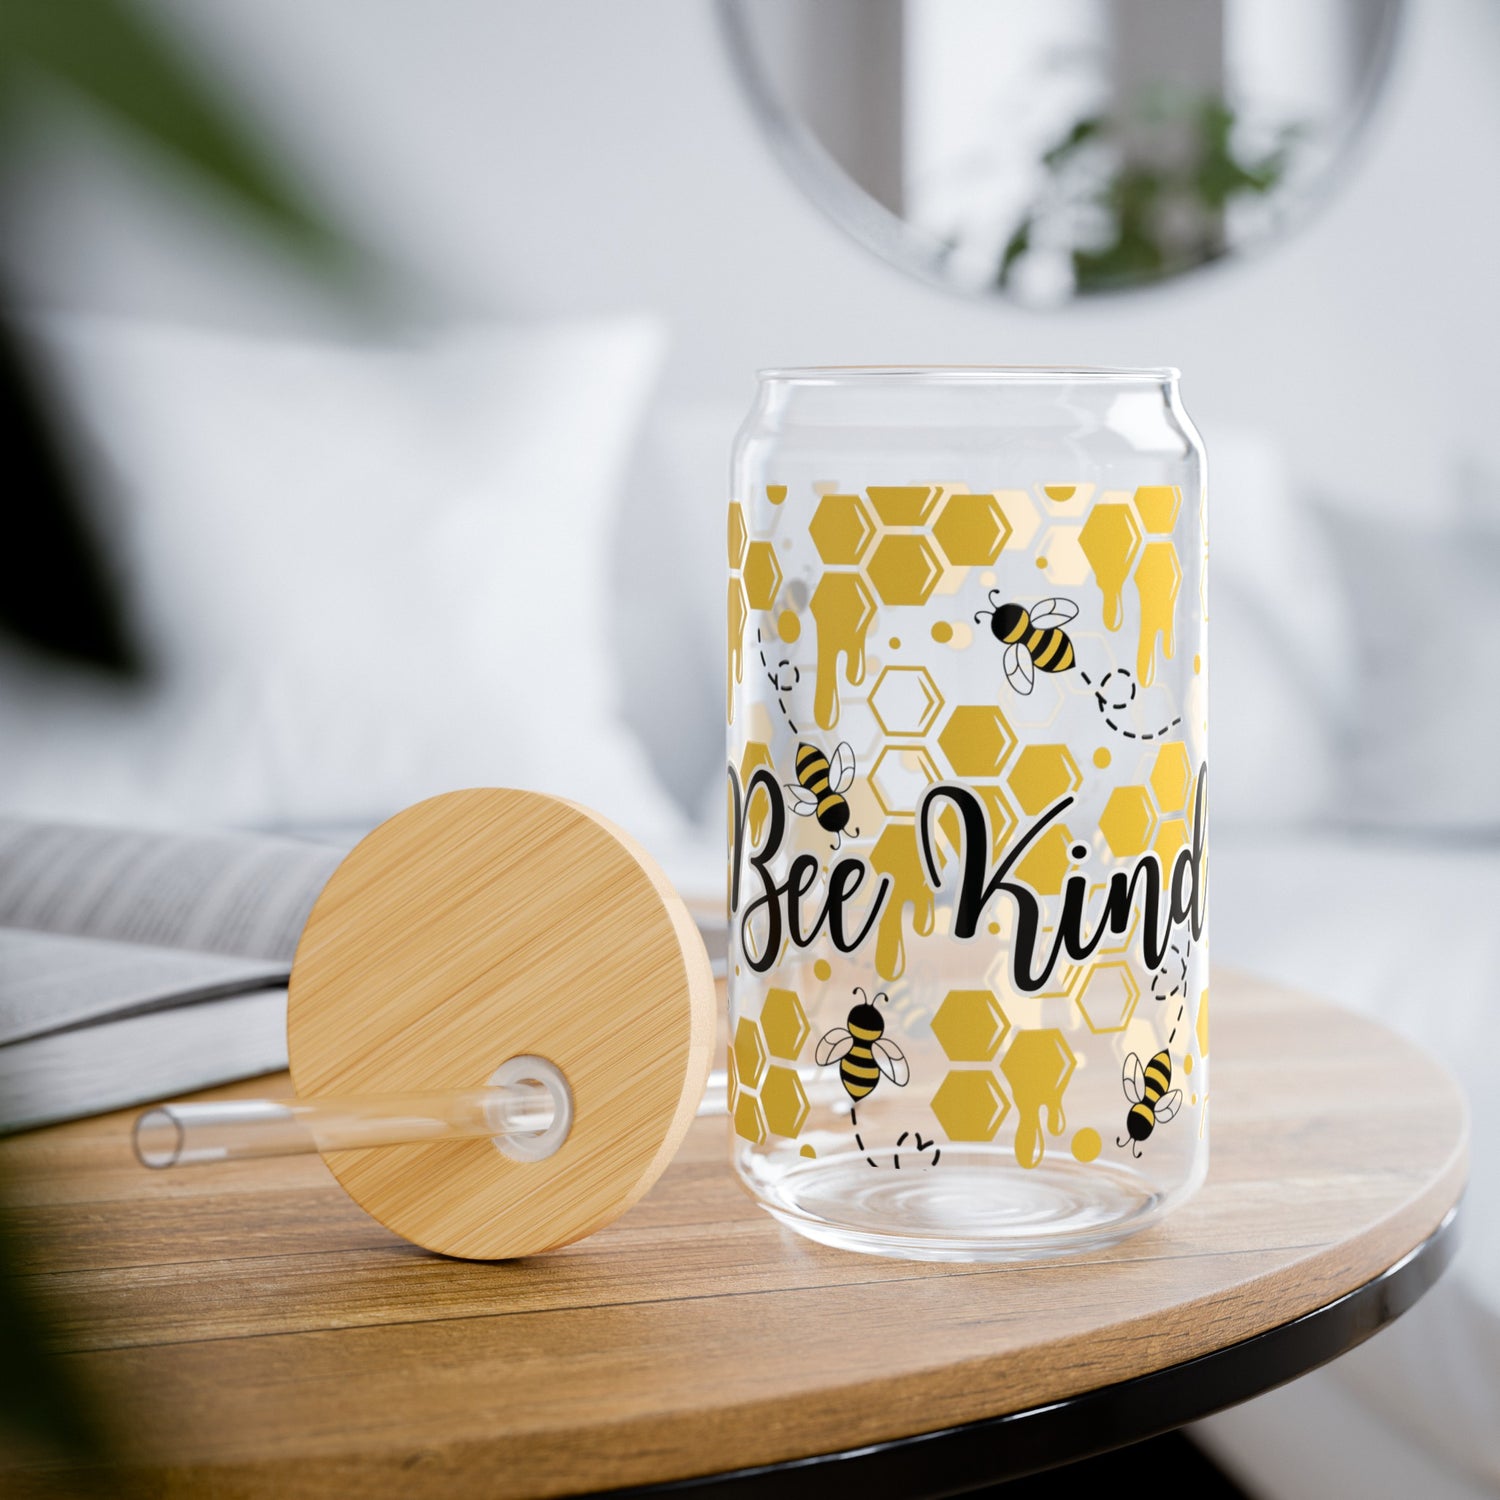 "Bee kind" 16oz Sipper Glass